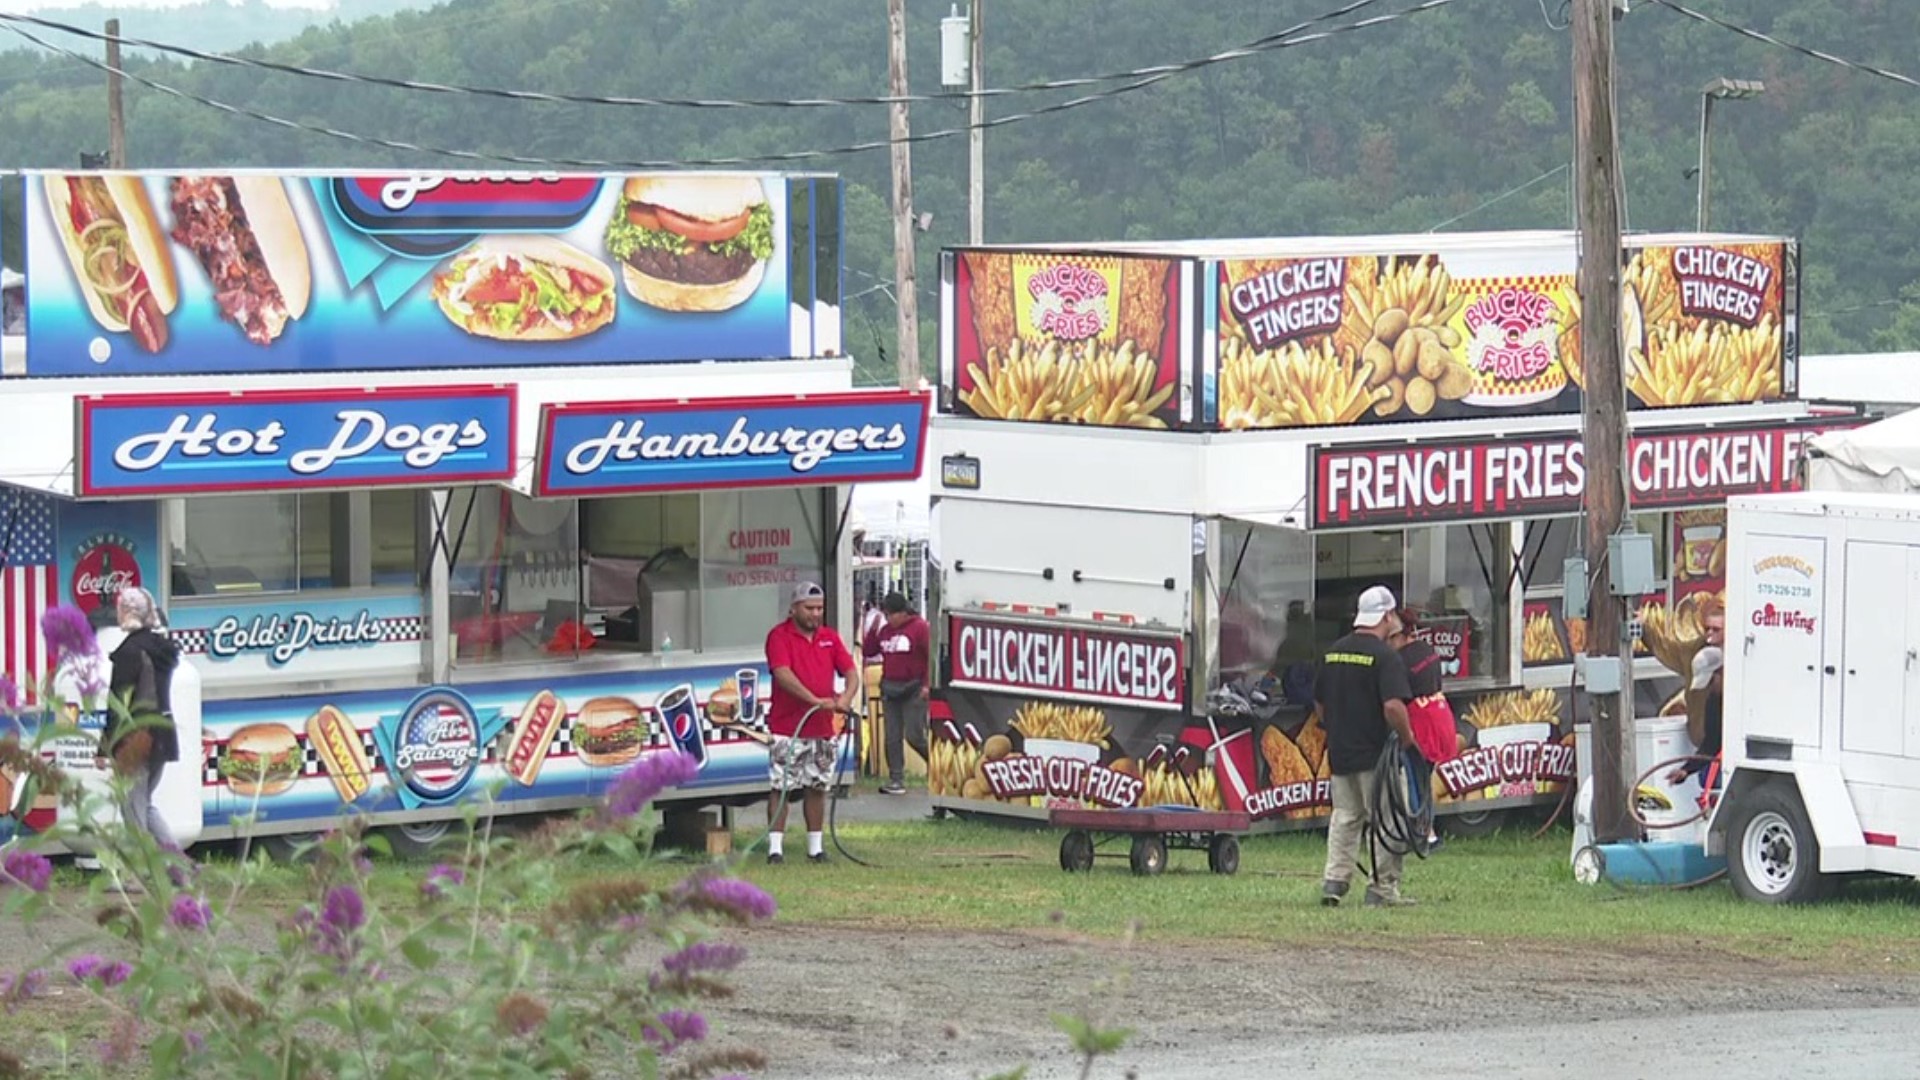 Wyoming County Fair ends early